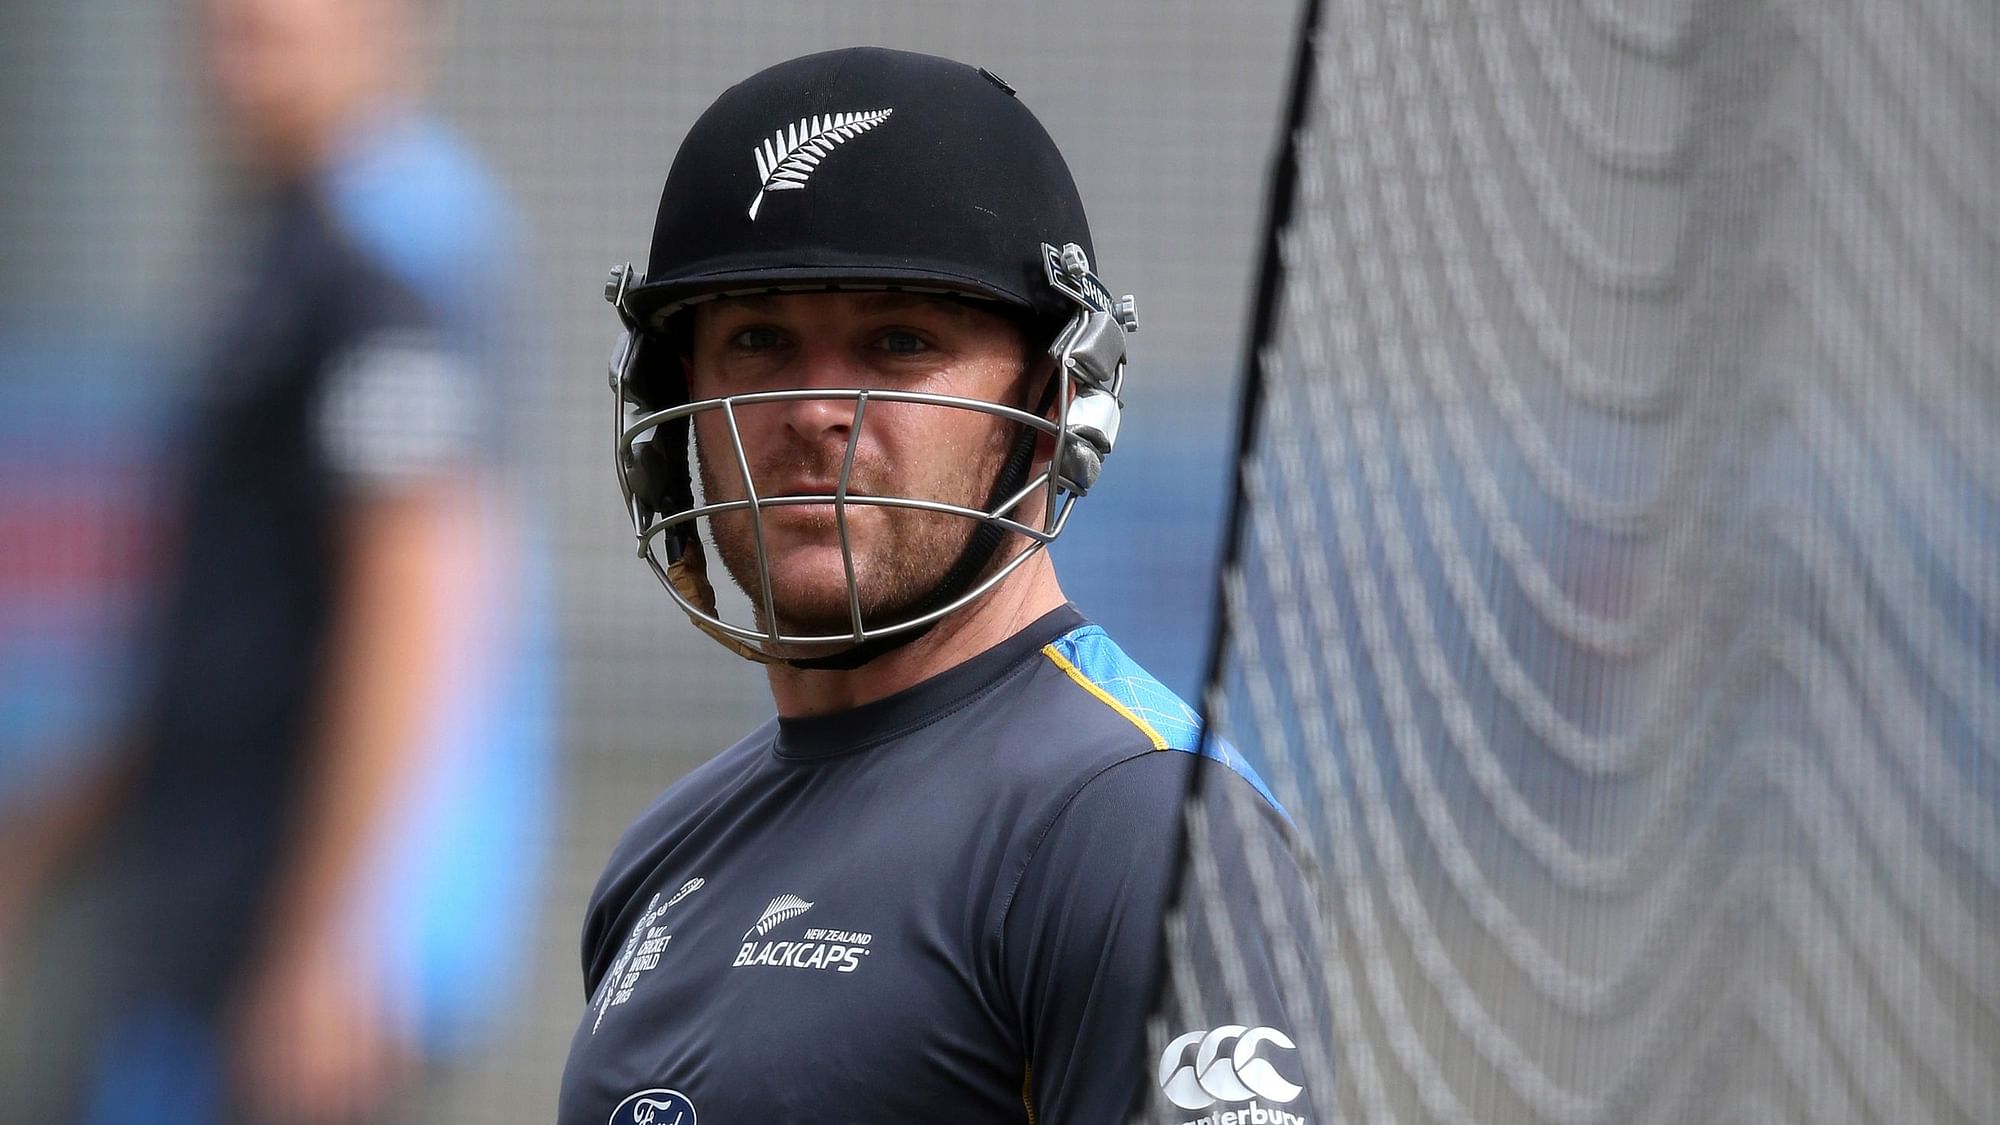 Former New Zealand captain Brendon McCullum has announced his retirement from cricket at the age of 37.